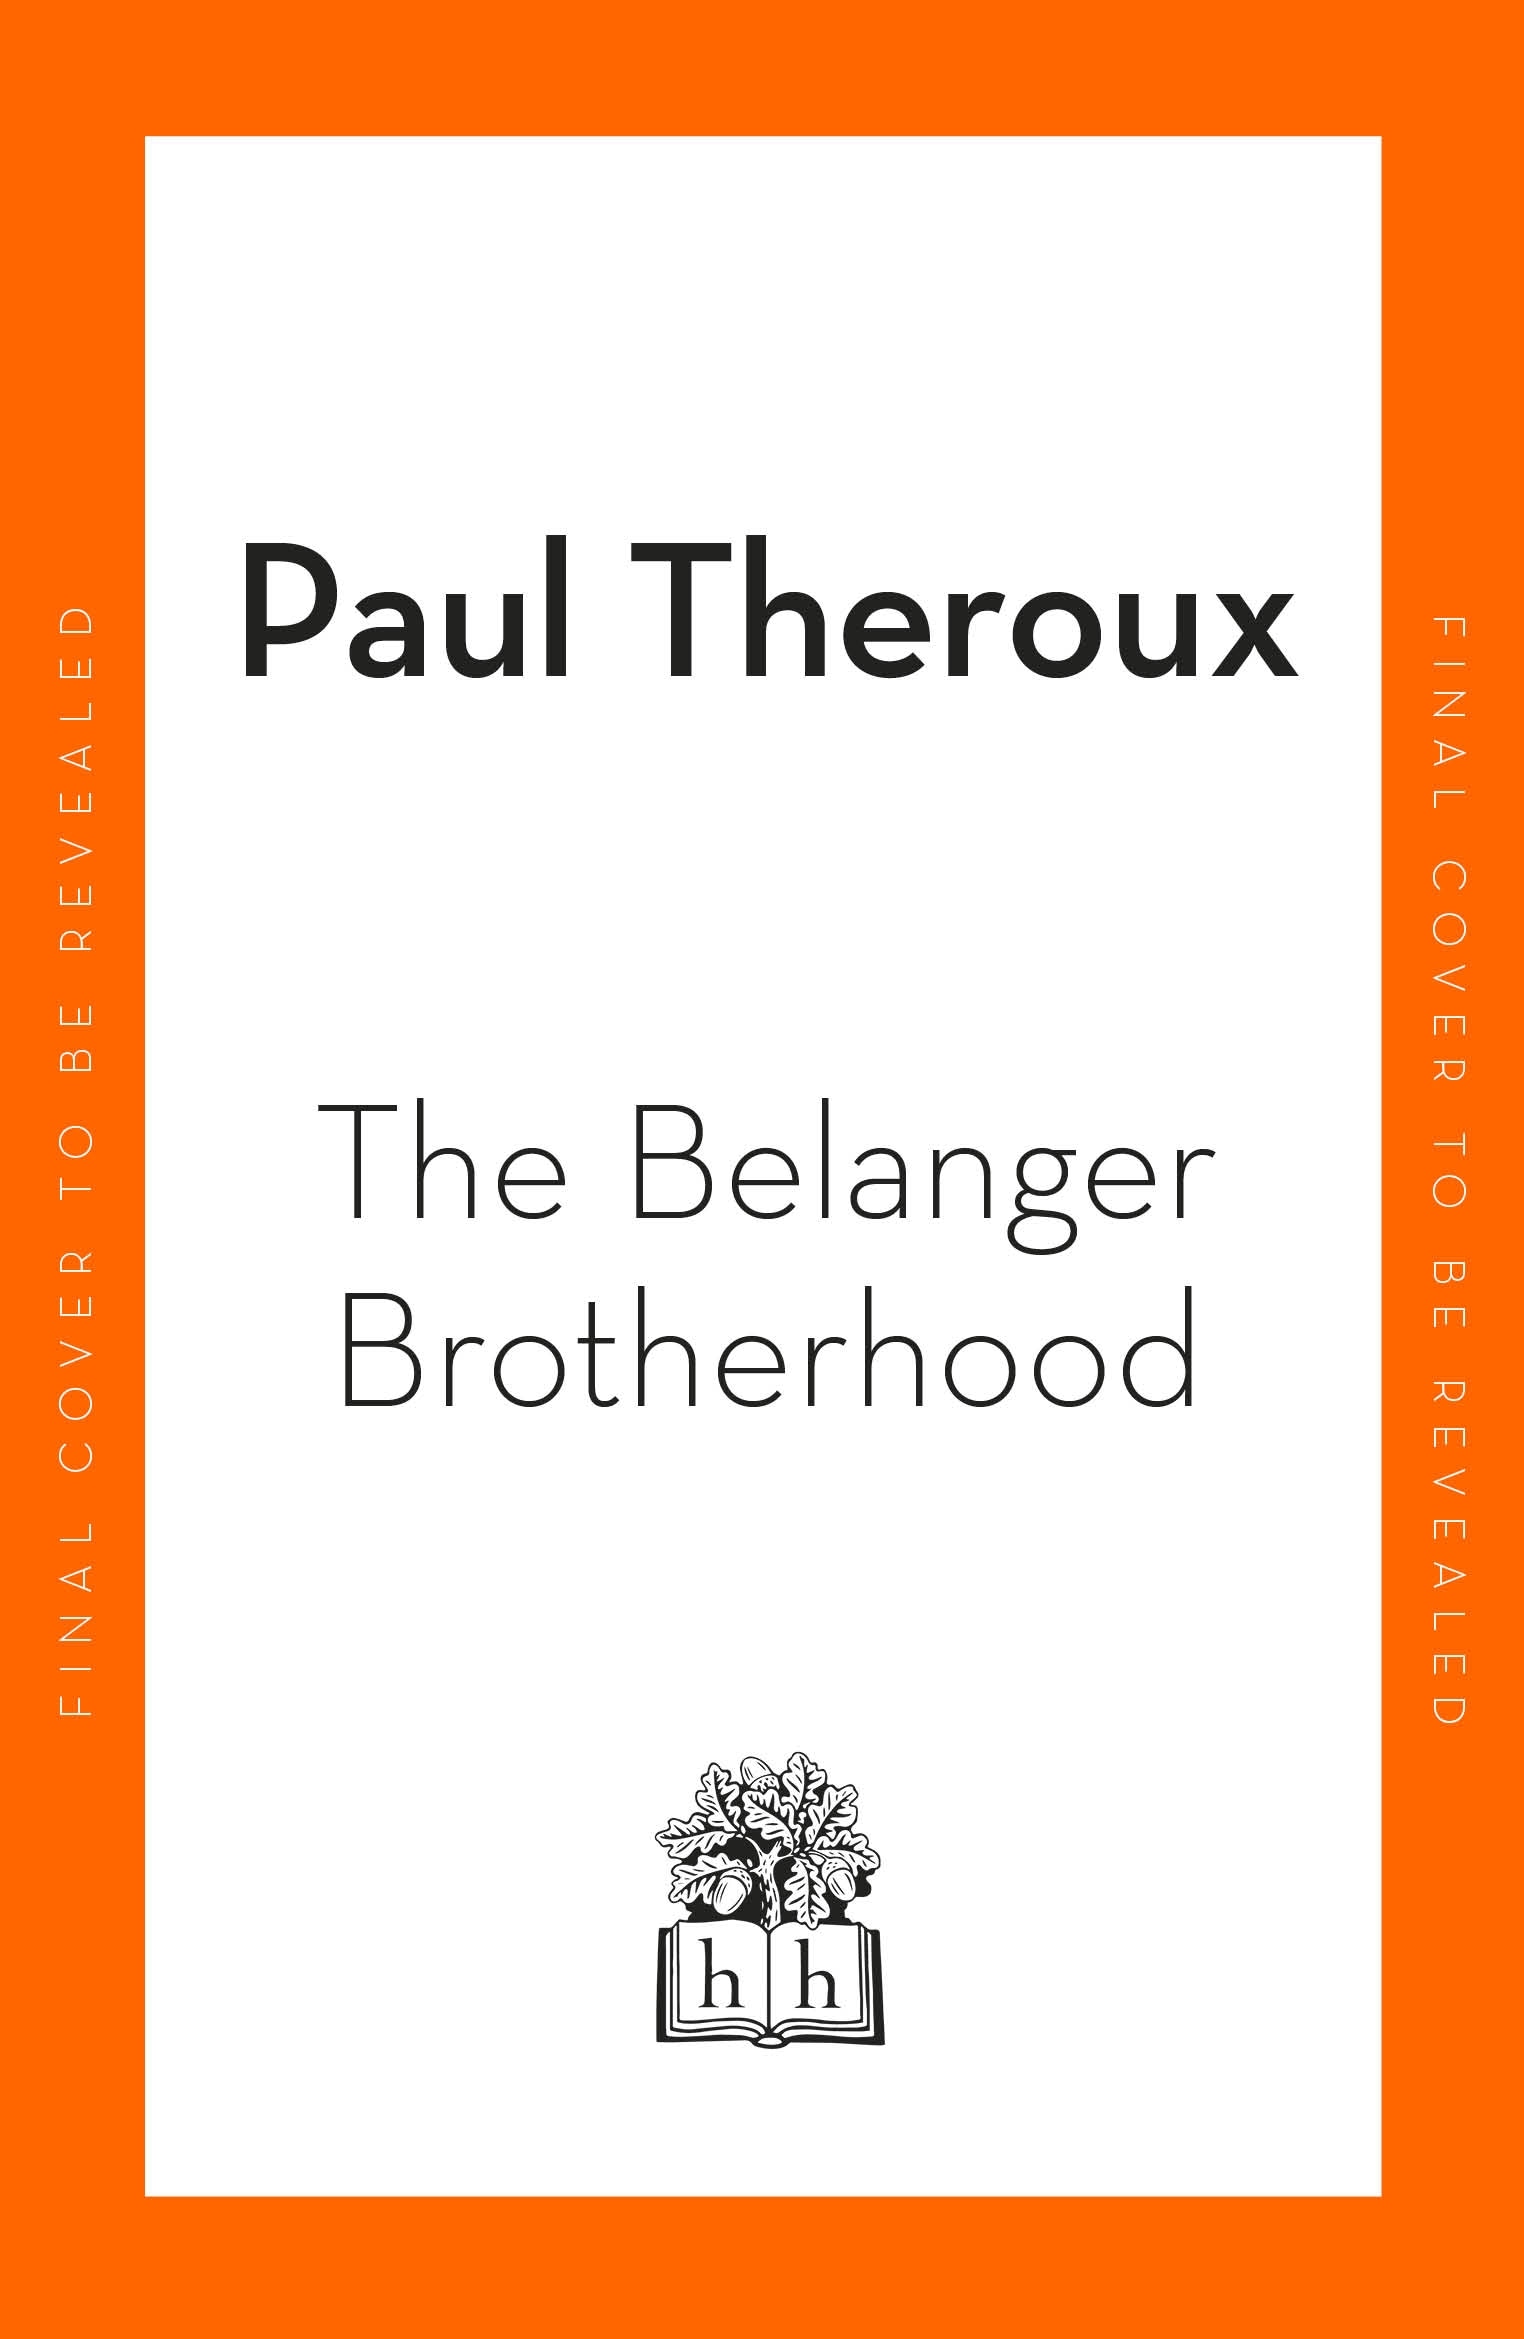 Book “The Belanger Brotherhood” by Paul Theroux — September 22, 2022